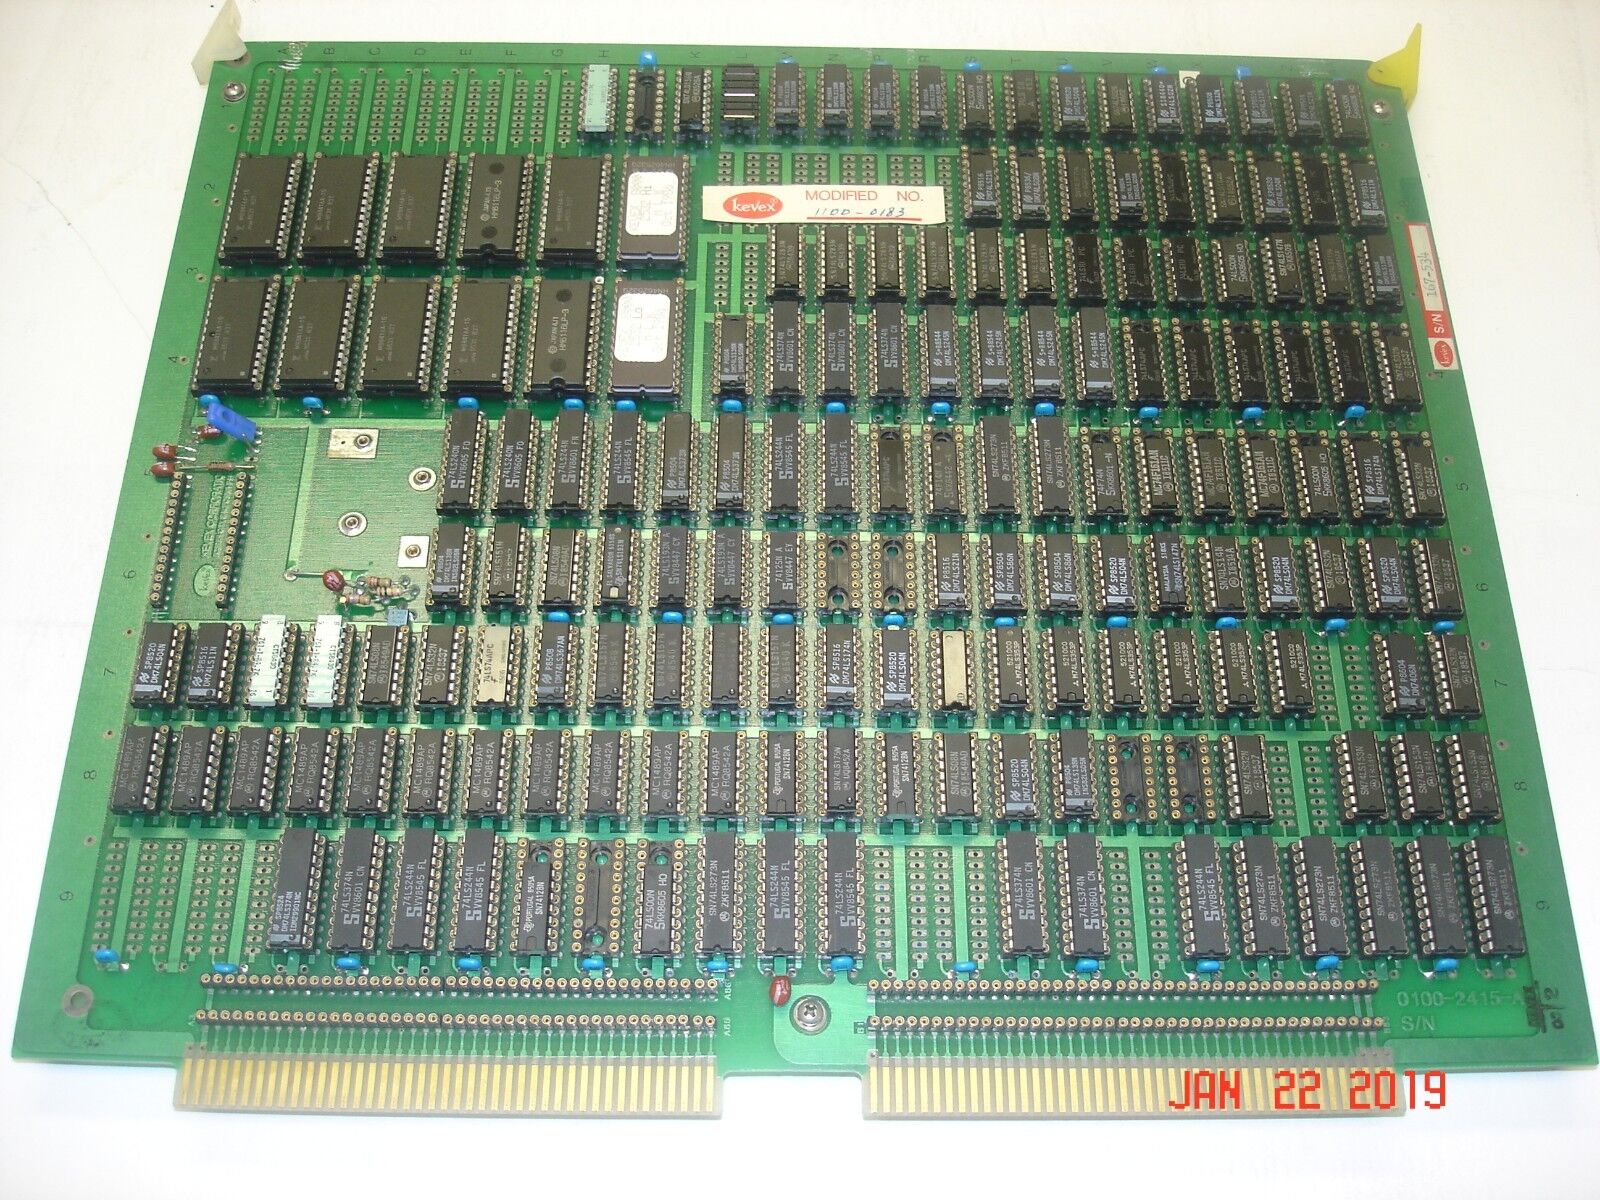 KEVEX X-RAY COMPUTER BOARD ASSY# 0100-2415-A MODIFIED# 1100-0183 WORKING PULL